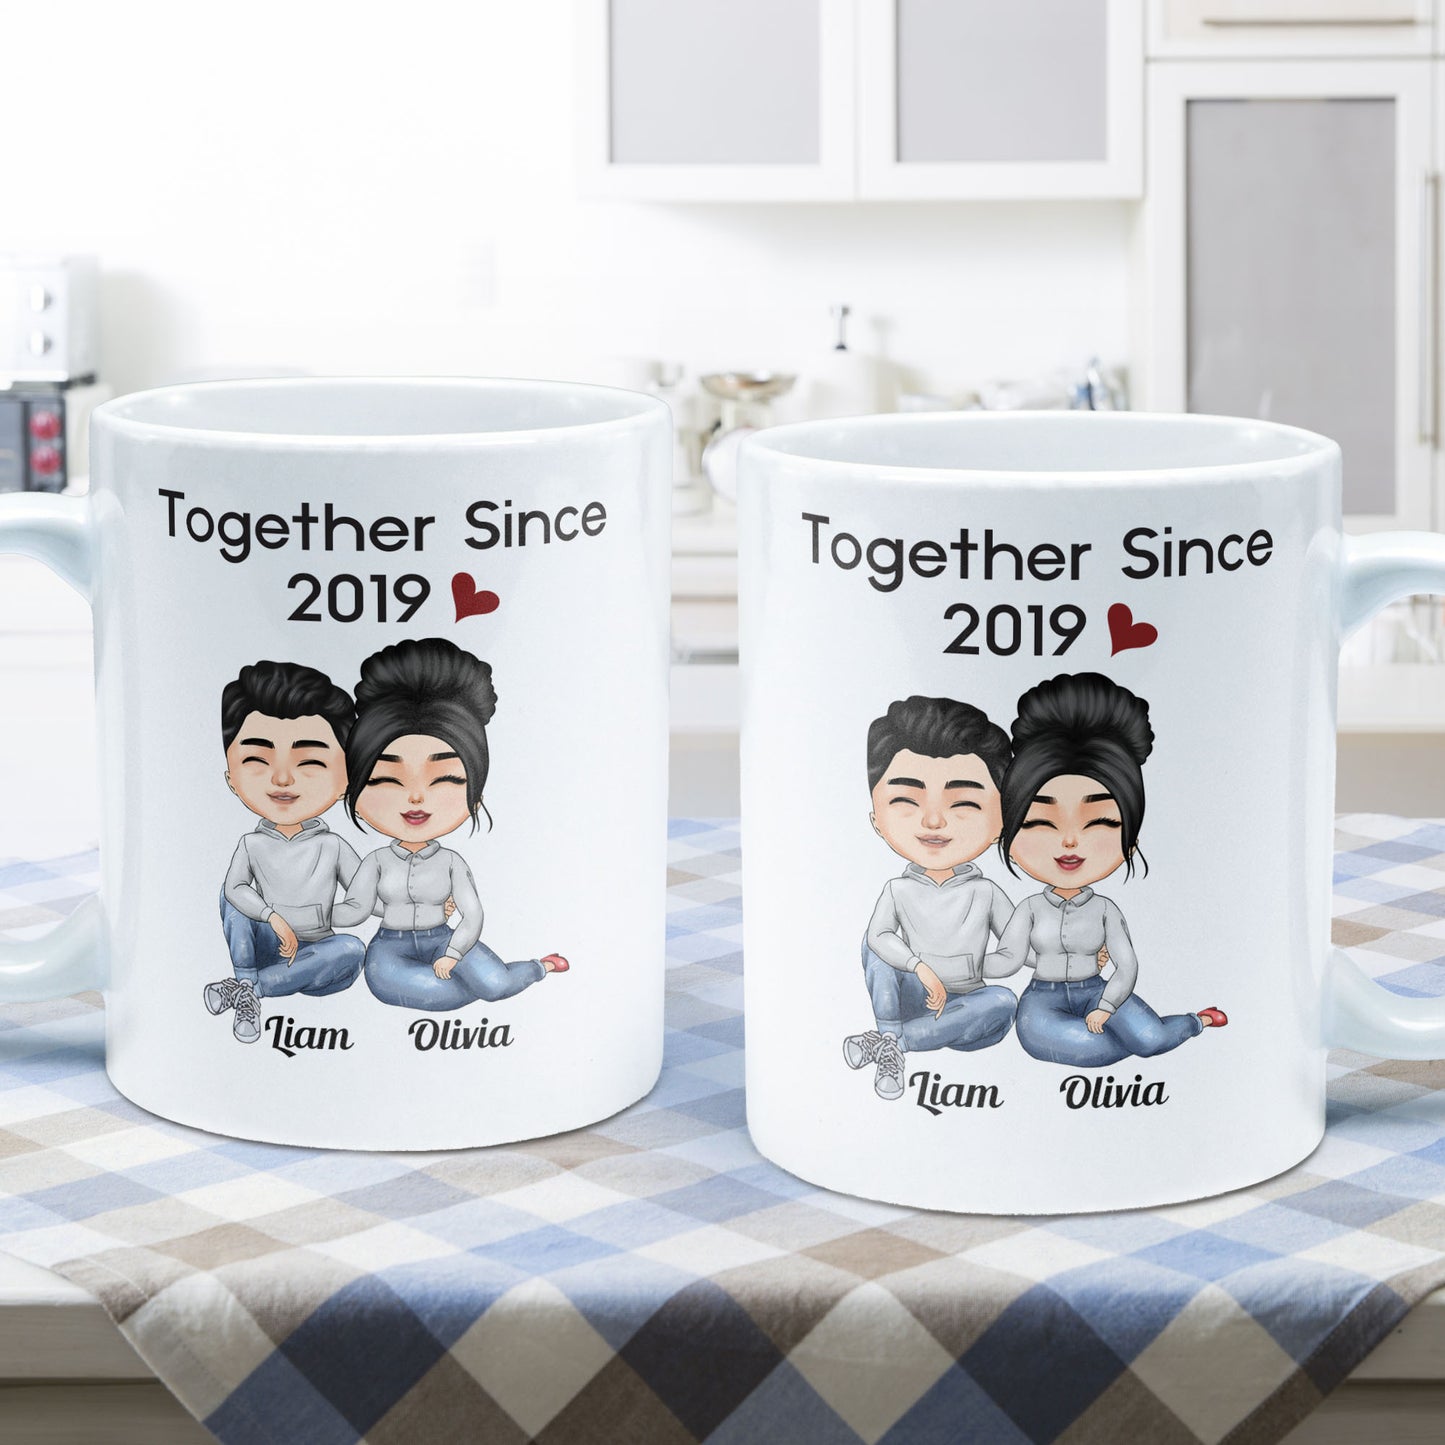 Together Since - Personalized Mug - Anniversary, Valentine's Day Gift For Spouse, Husband, Wife, Lovers, Girlfriend, Boyfriend